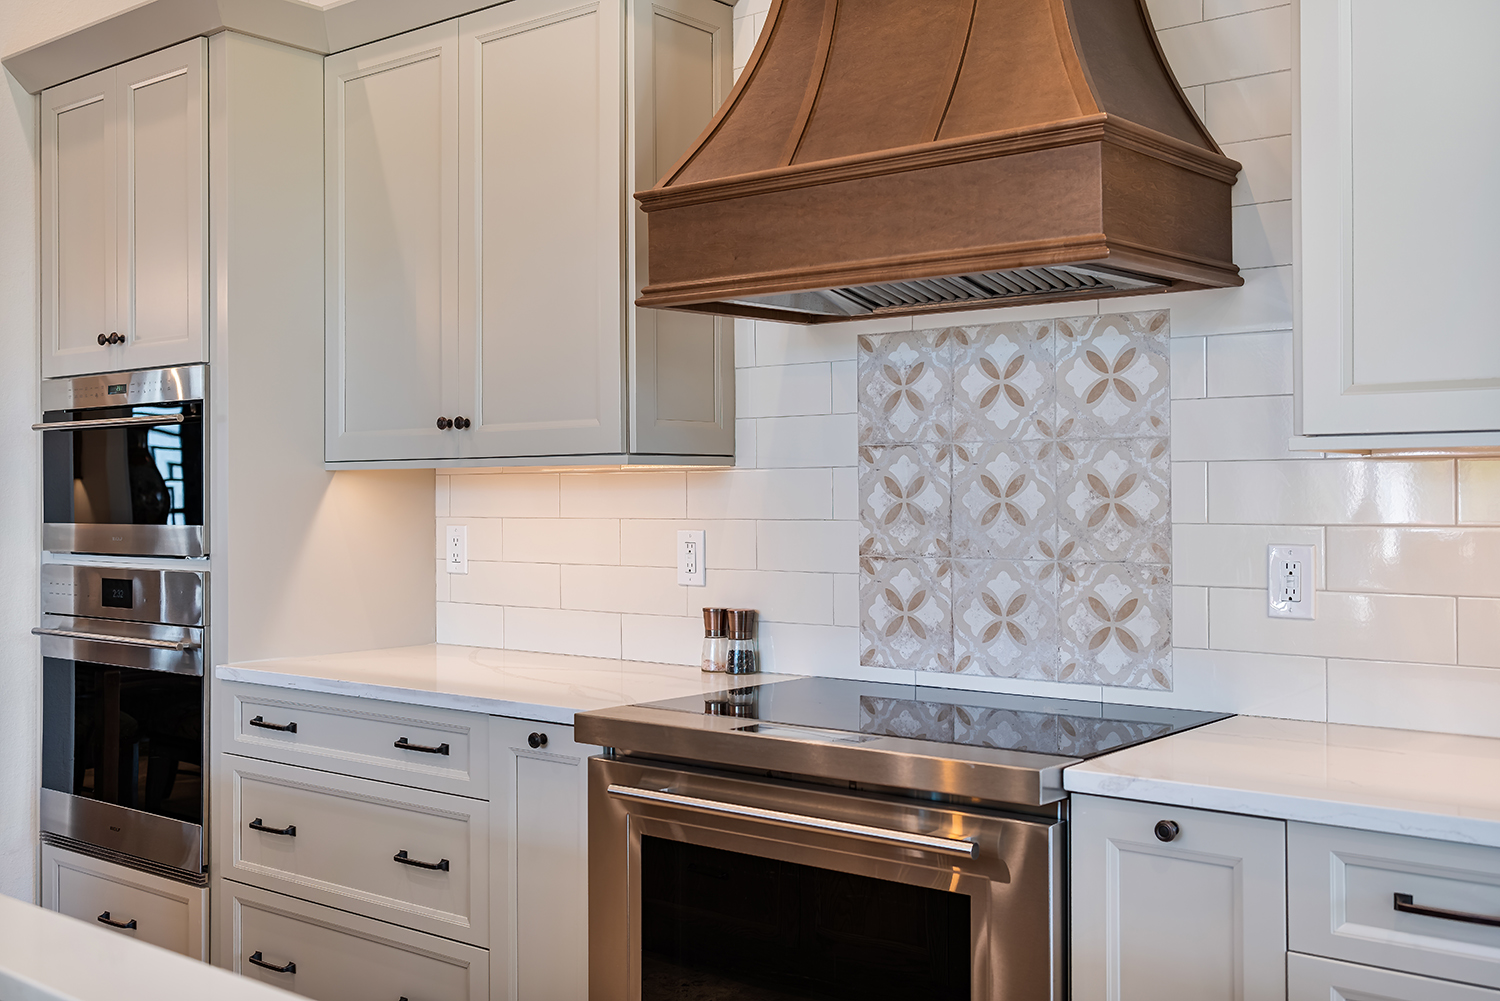 Custom built kitchen by Armstrong Construction Group. Shows kitchen oven and stove with bronze vent, light grey cabinets, white countertops and an ornate tile backsplash.